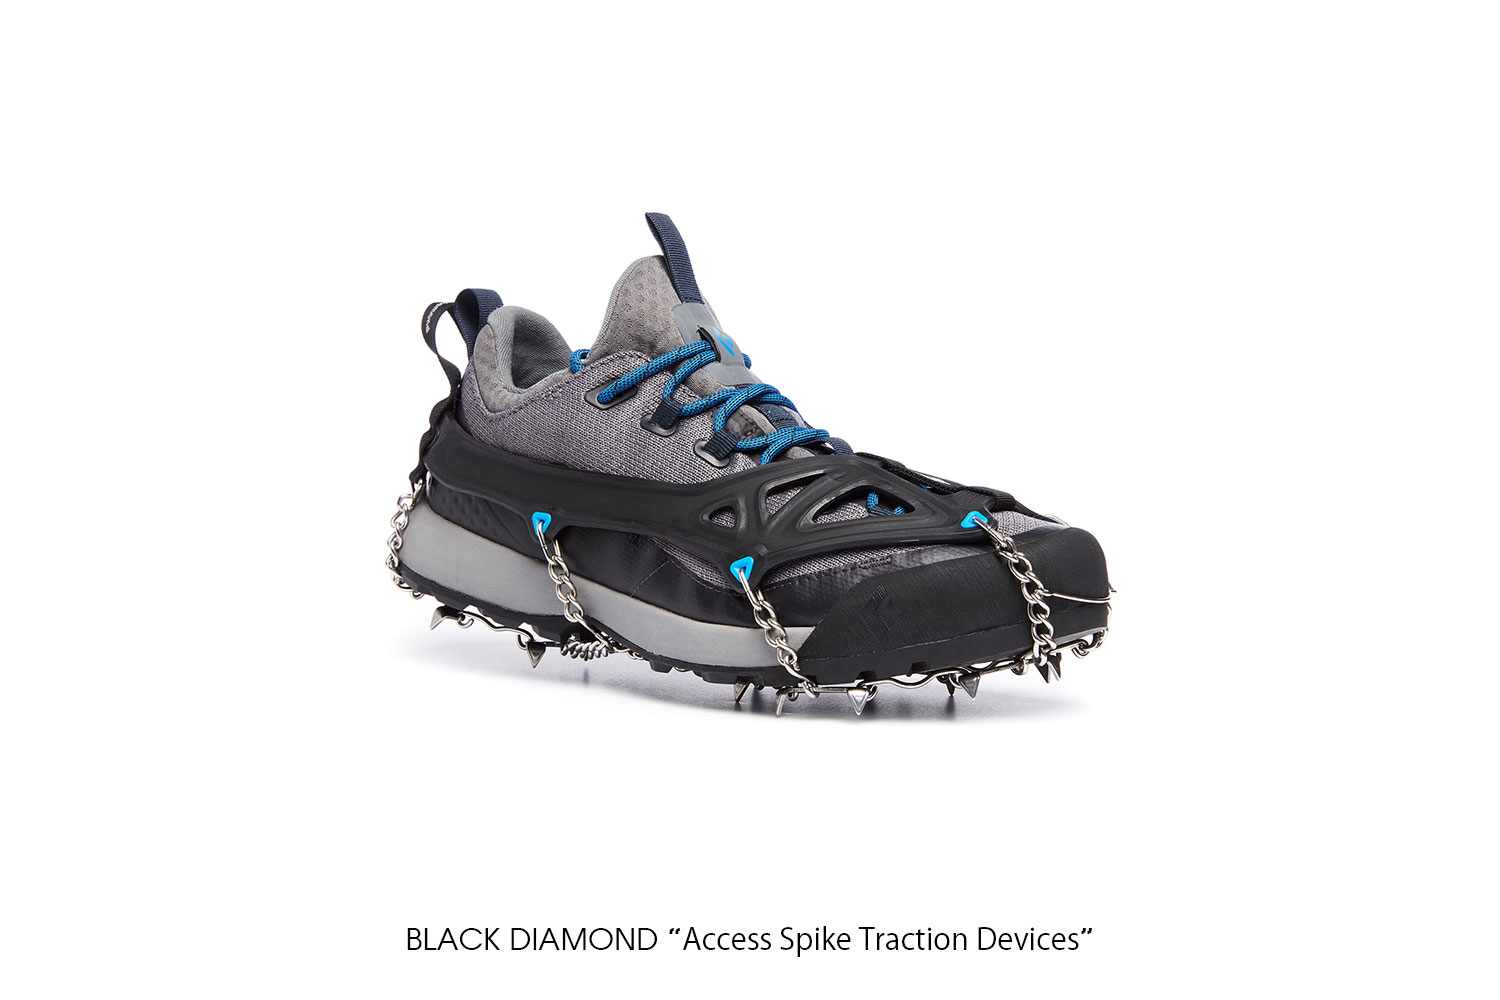 BLACK DIAMOND “Access Spike Traction Devices” | PORTAL(ポータル)